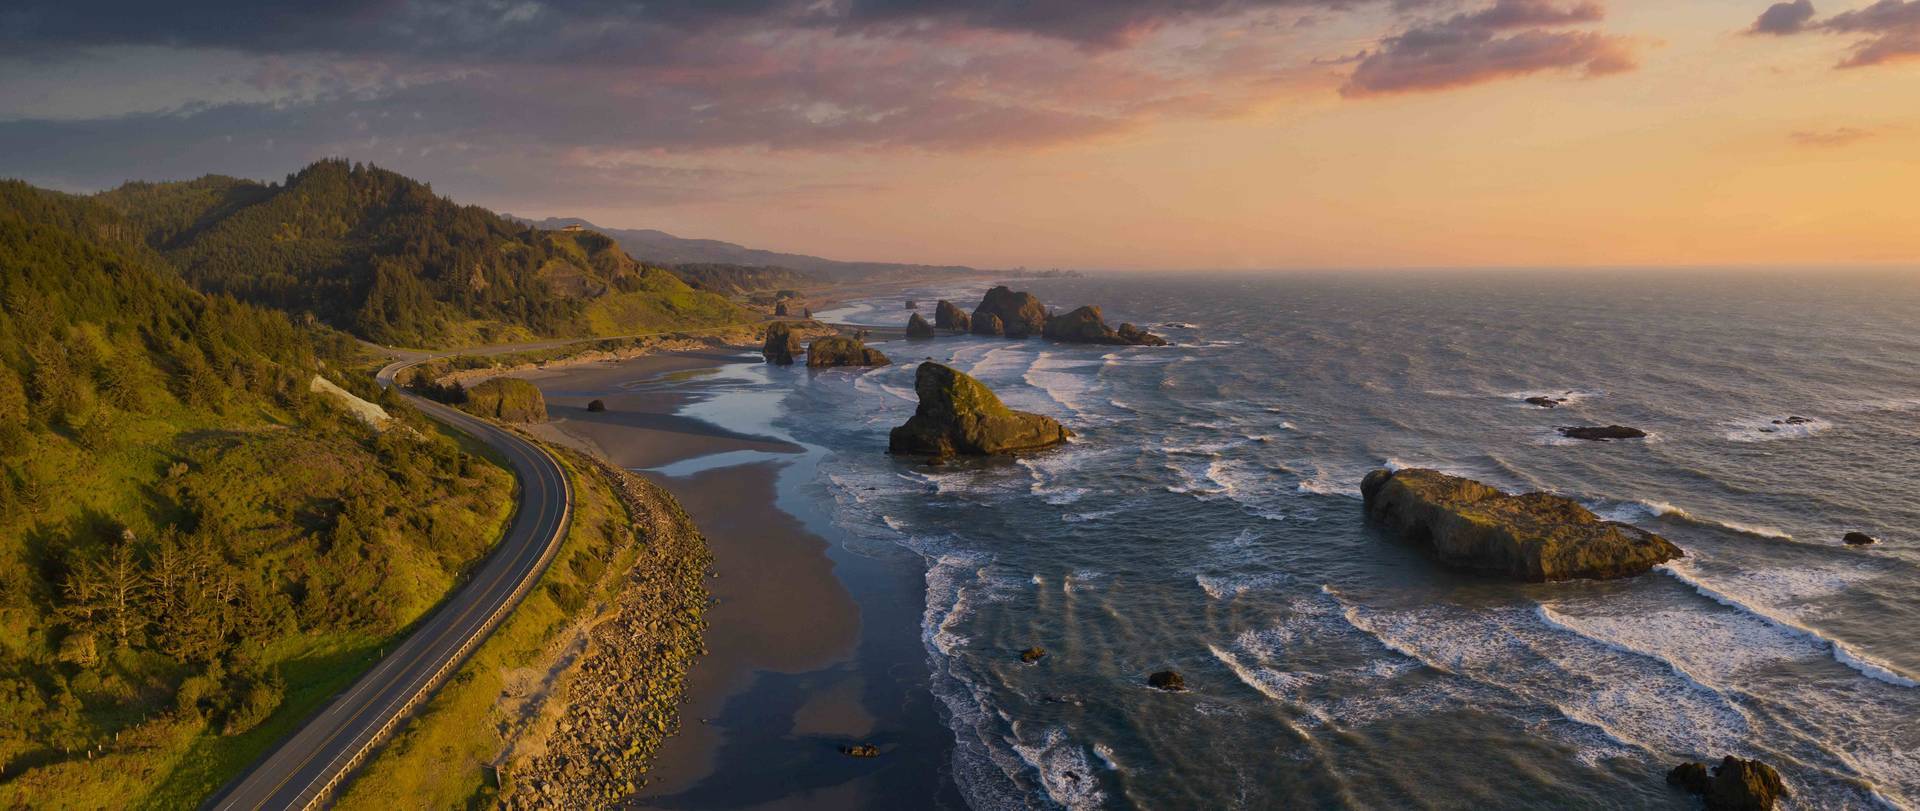 Aerial view of the coast of Oregon highlighting a road and the sea stacks during sunset